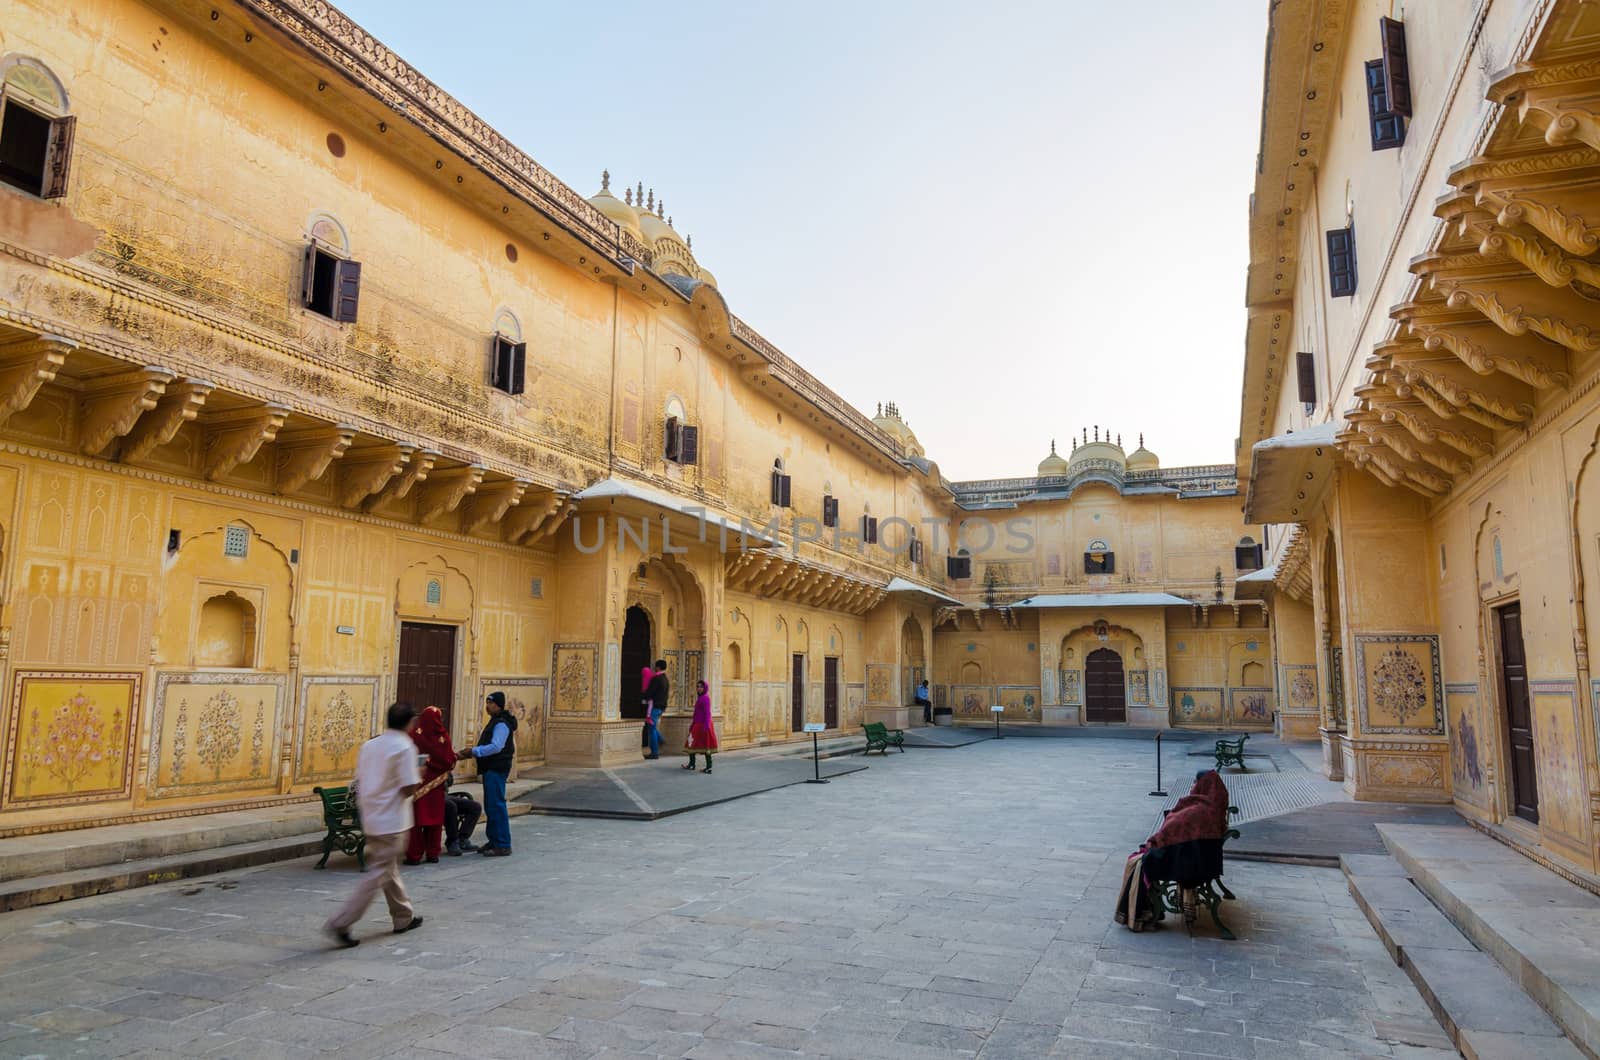 Jaipur, India - December 30, 2014: Tourist visit Traditional architecture, Nahargarh Fort in Jaipur by siraanamwong